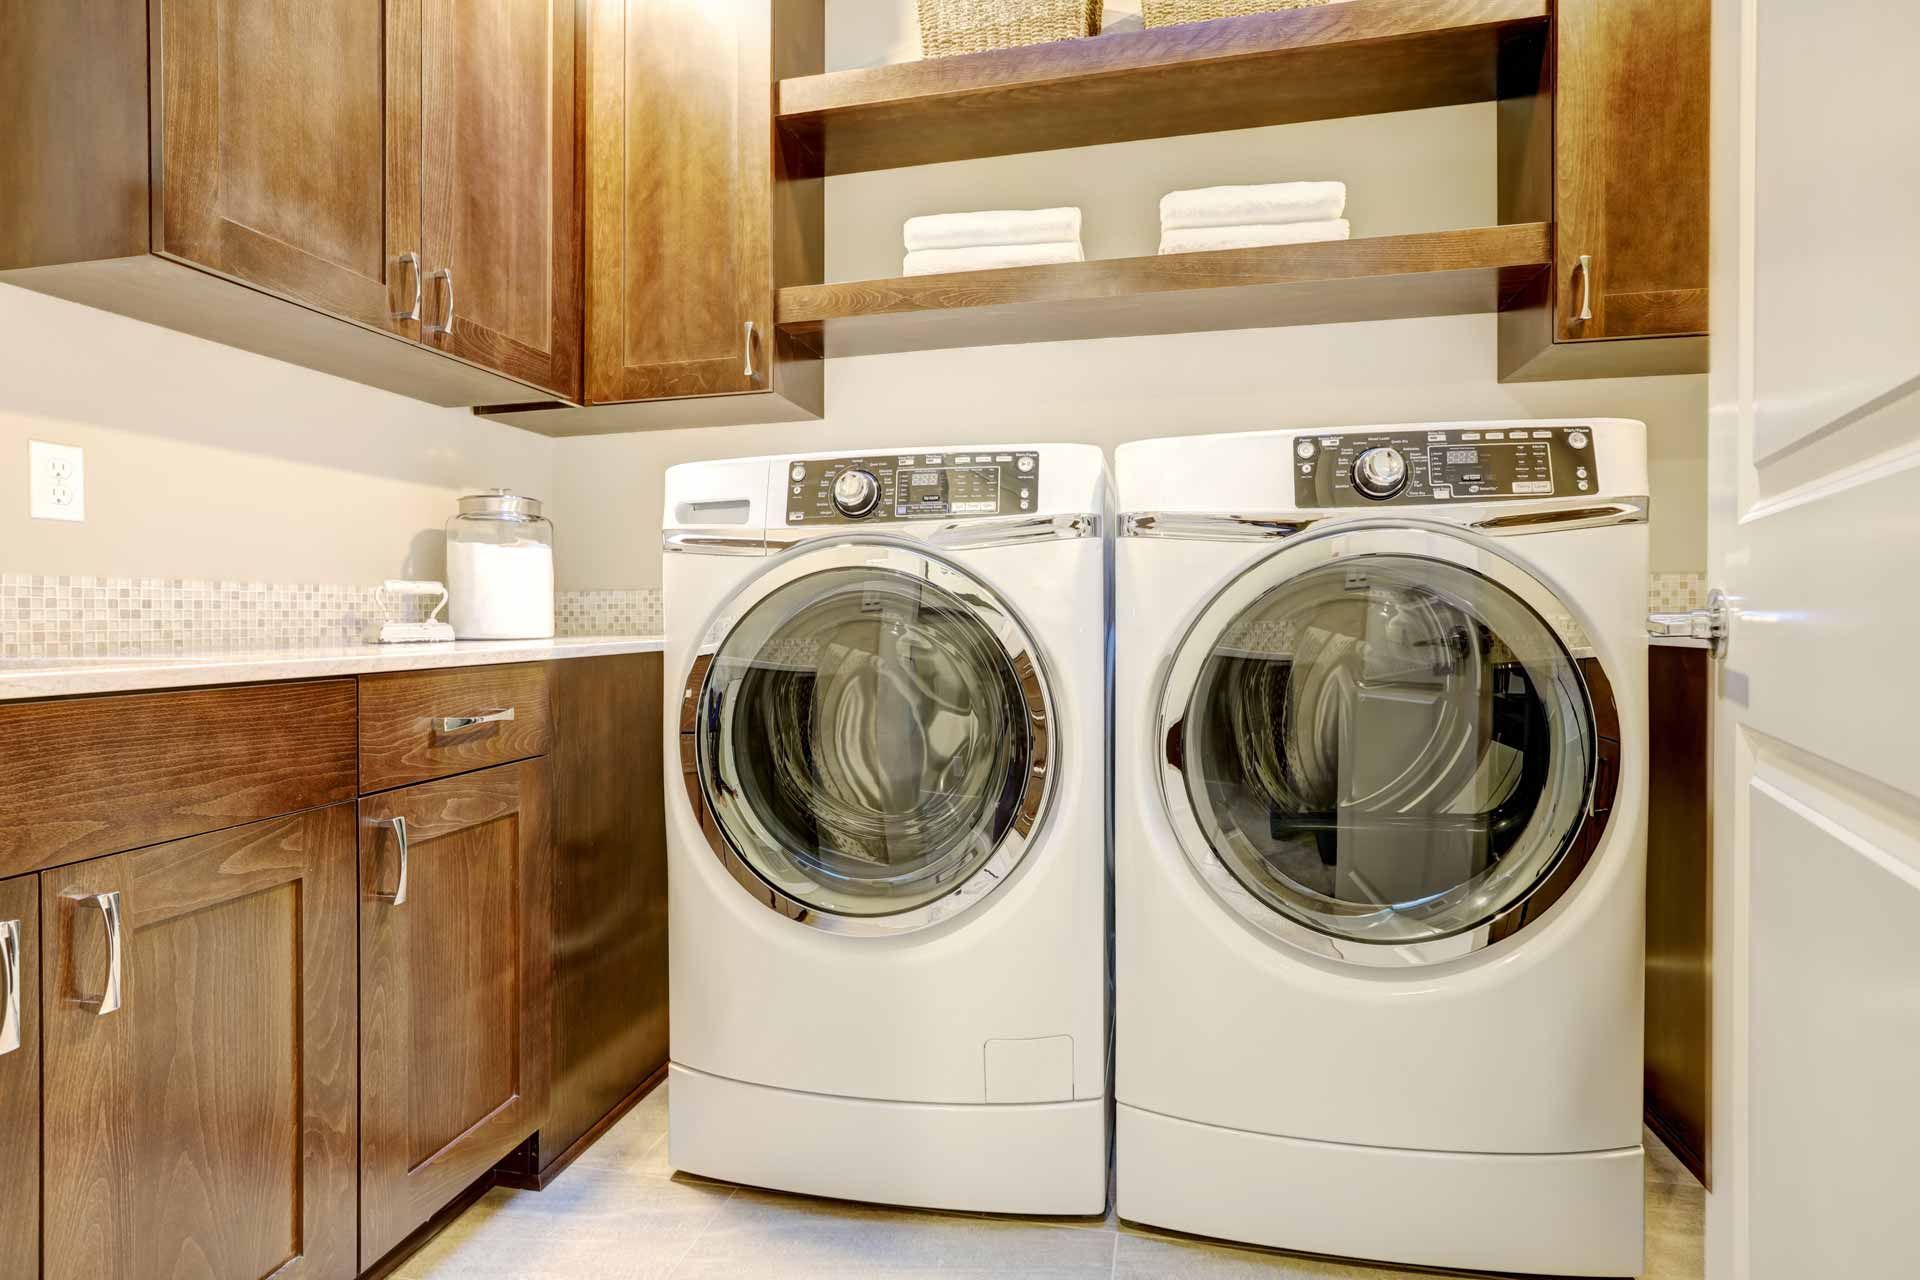 Clean, organized laundry room with matching washer/dryer set